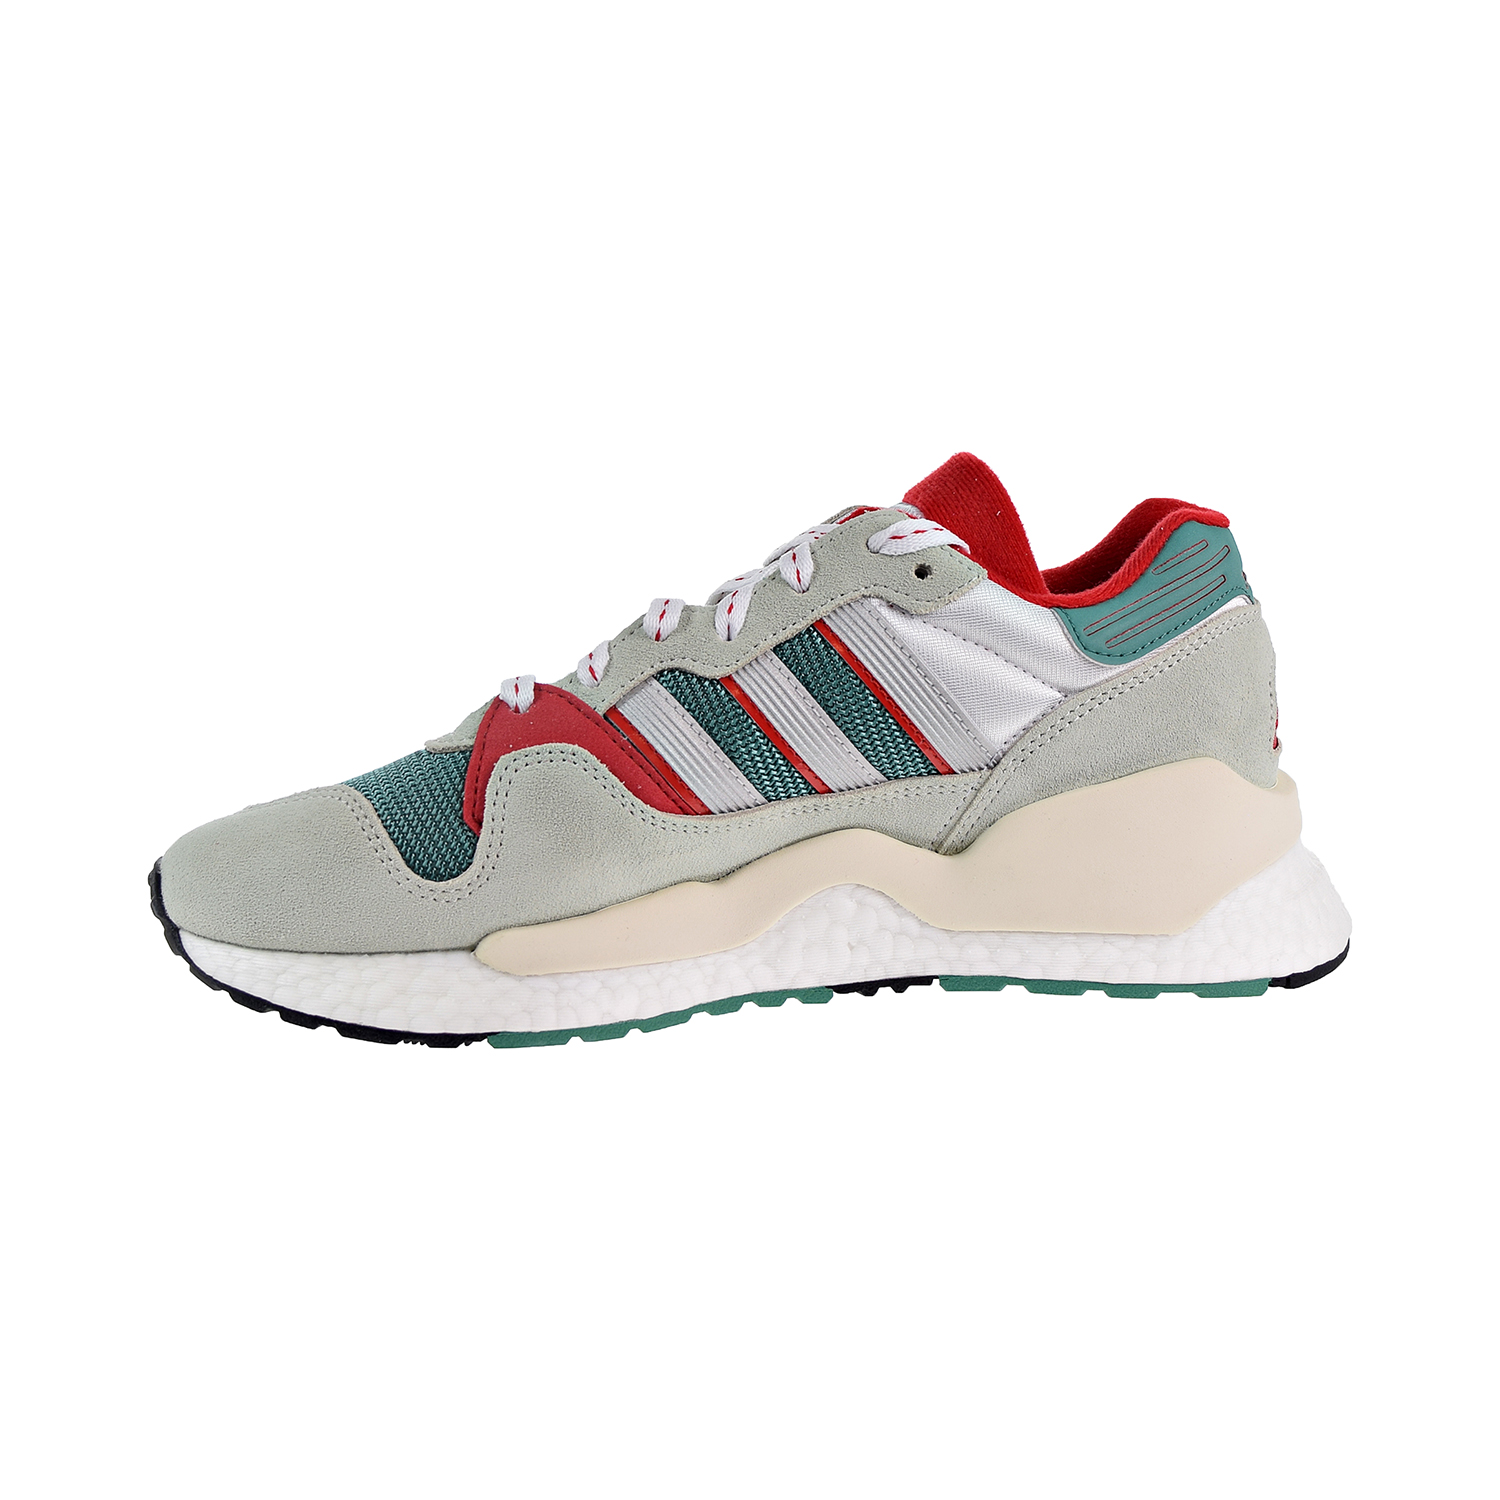 adidas zx 93 x eqt never made pack